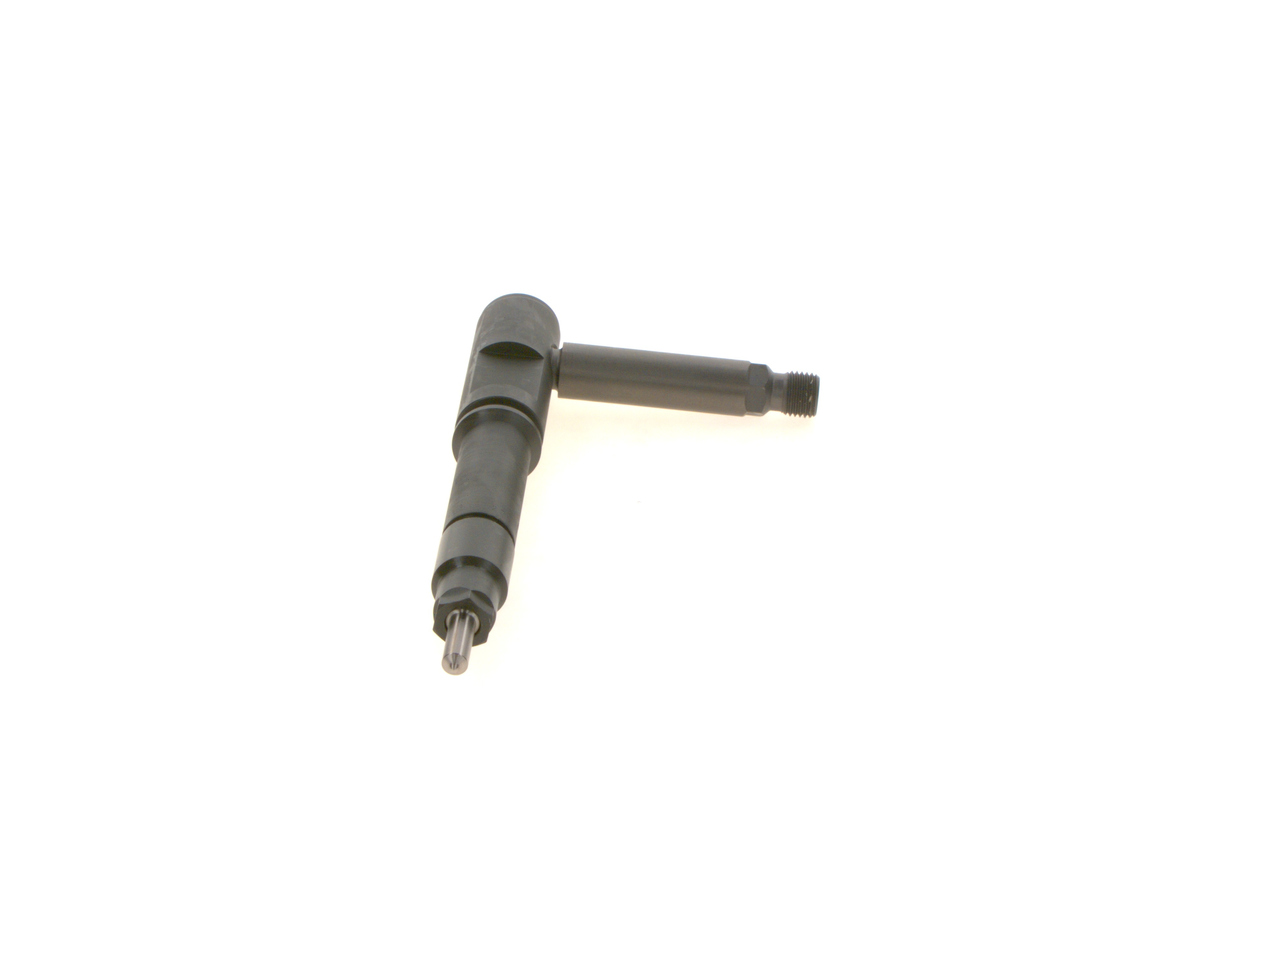 BOSCH 0 432 191 583 Nozzle and Holder Assembly